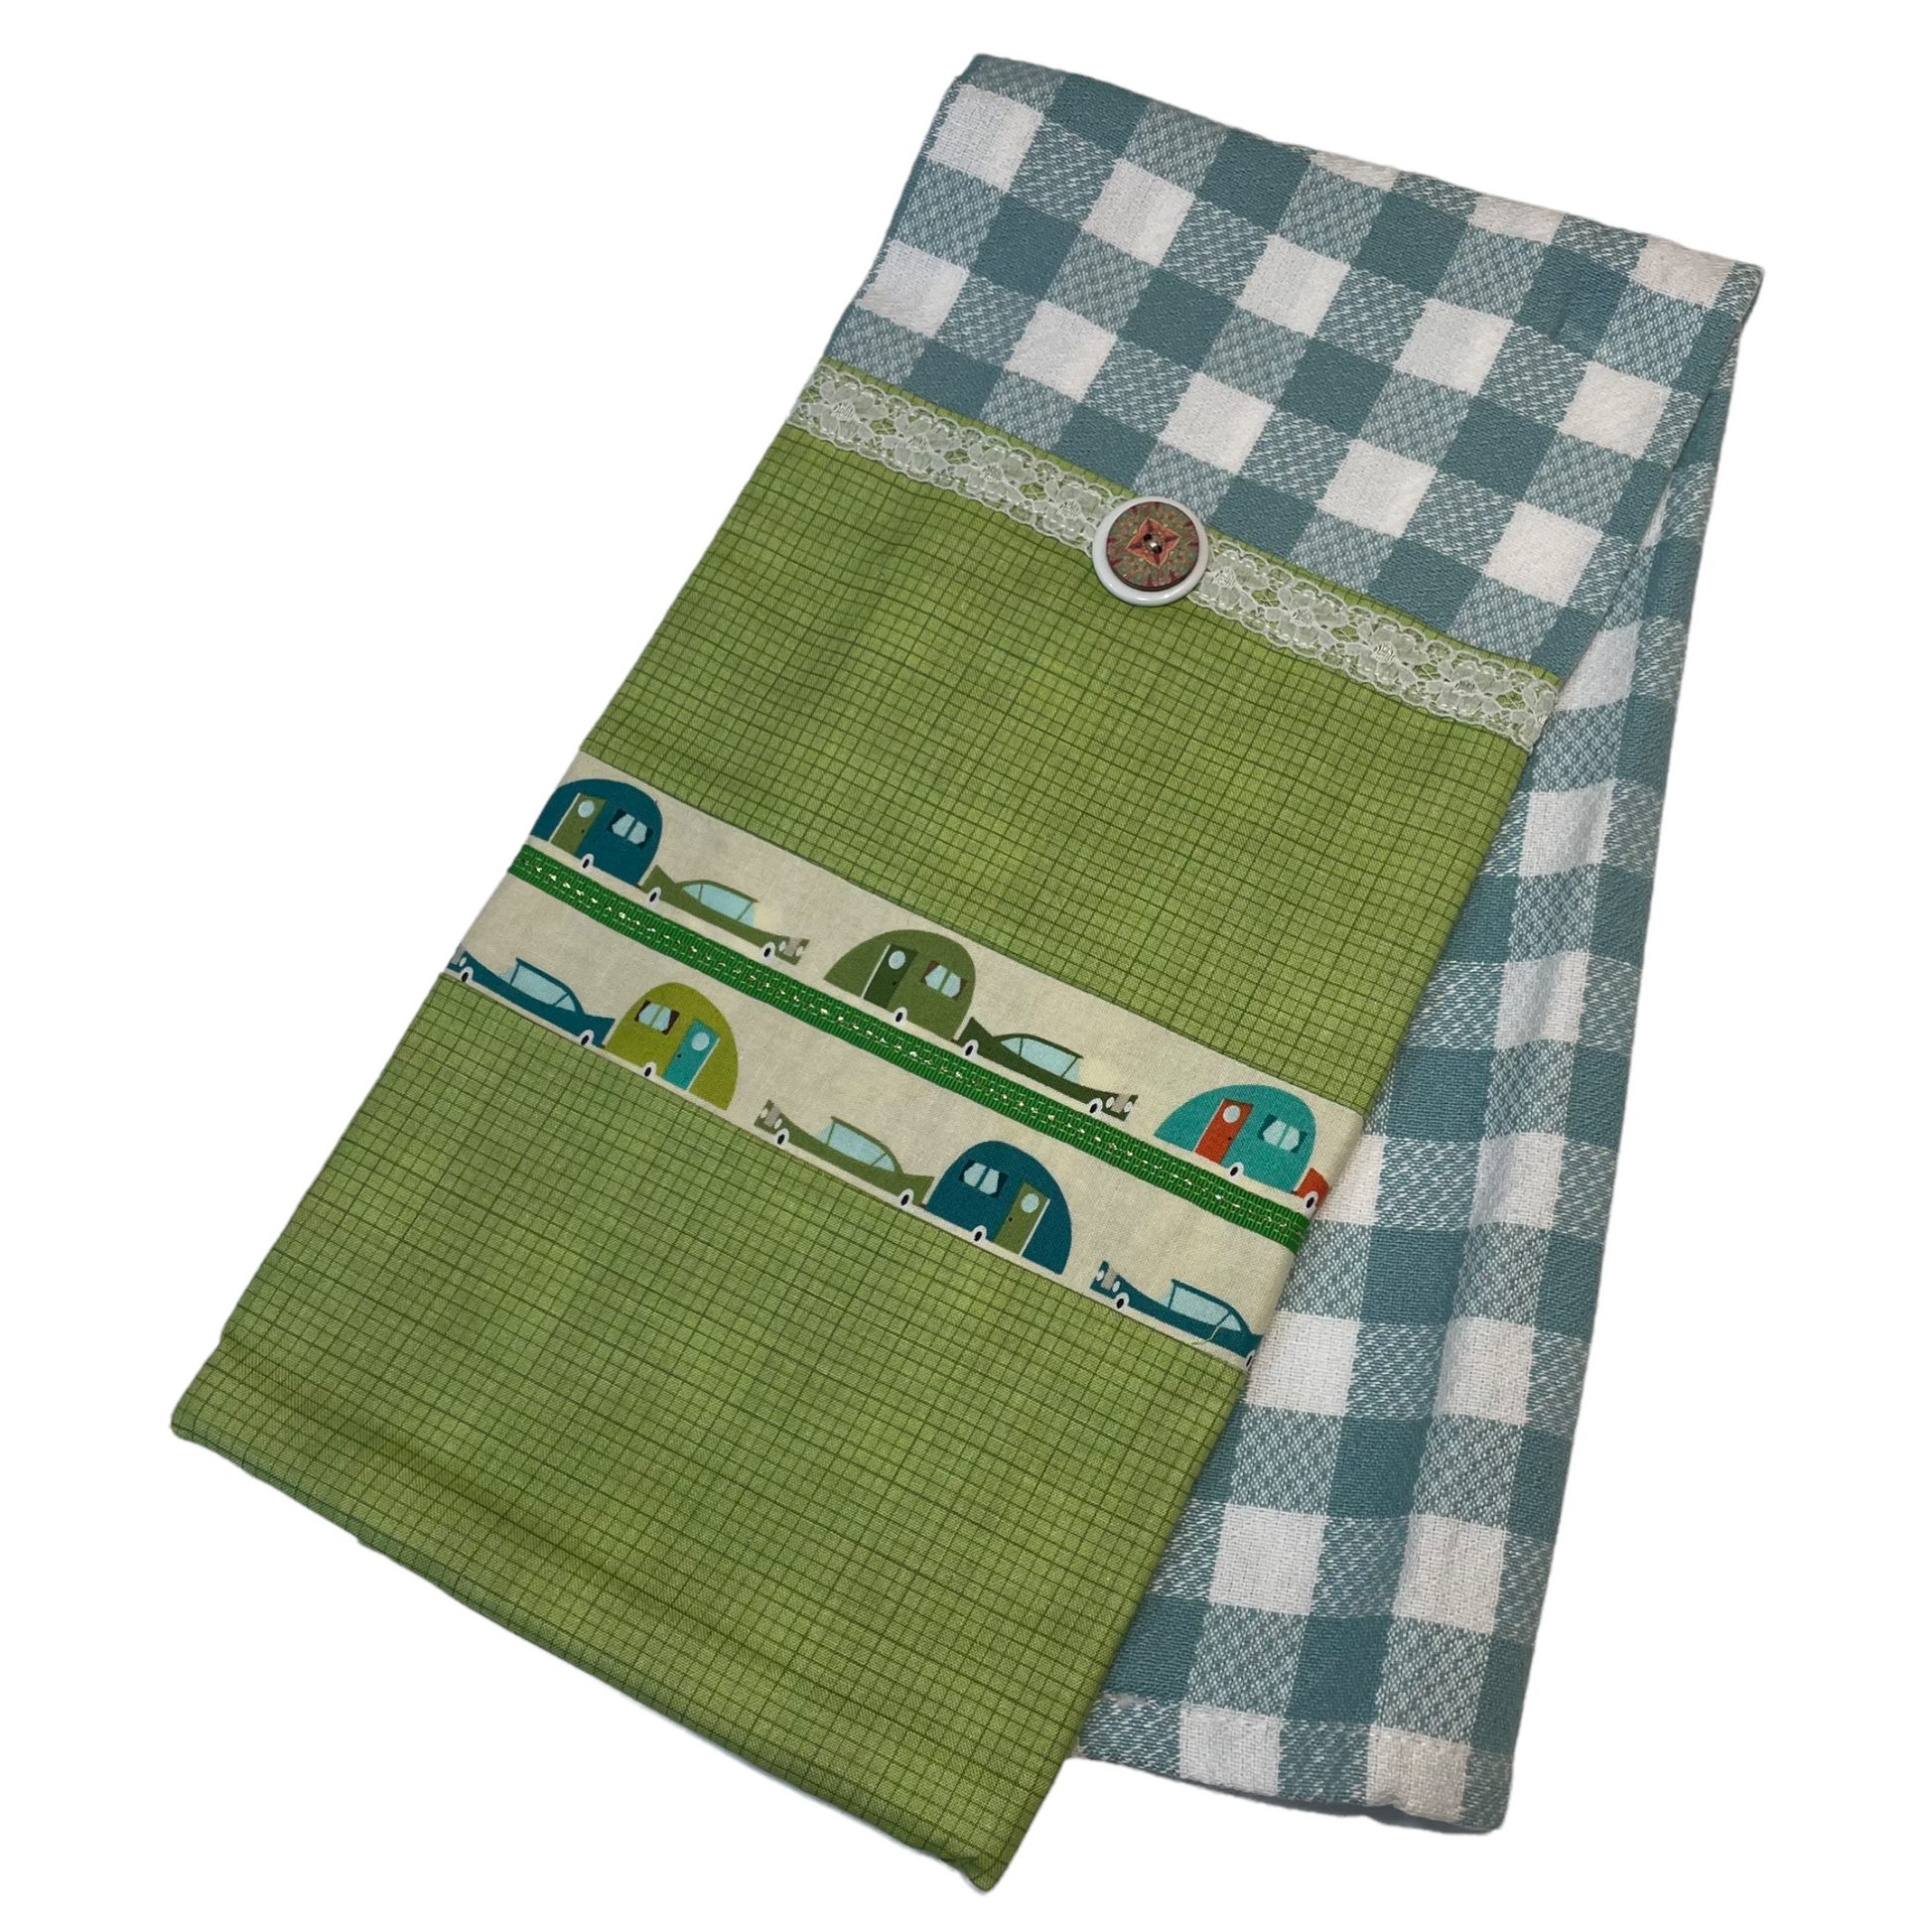 Kitchen Dish Towels Home Decor Dish Towels With Cute 